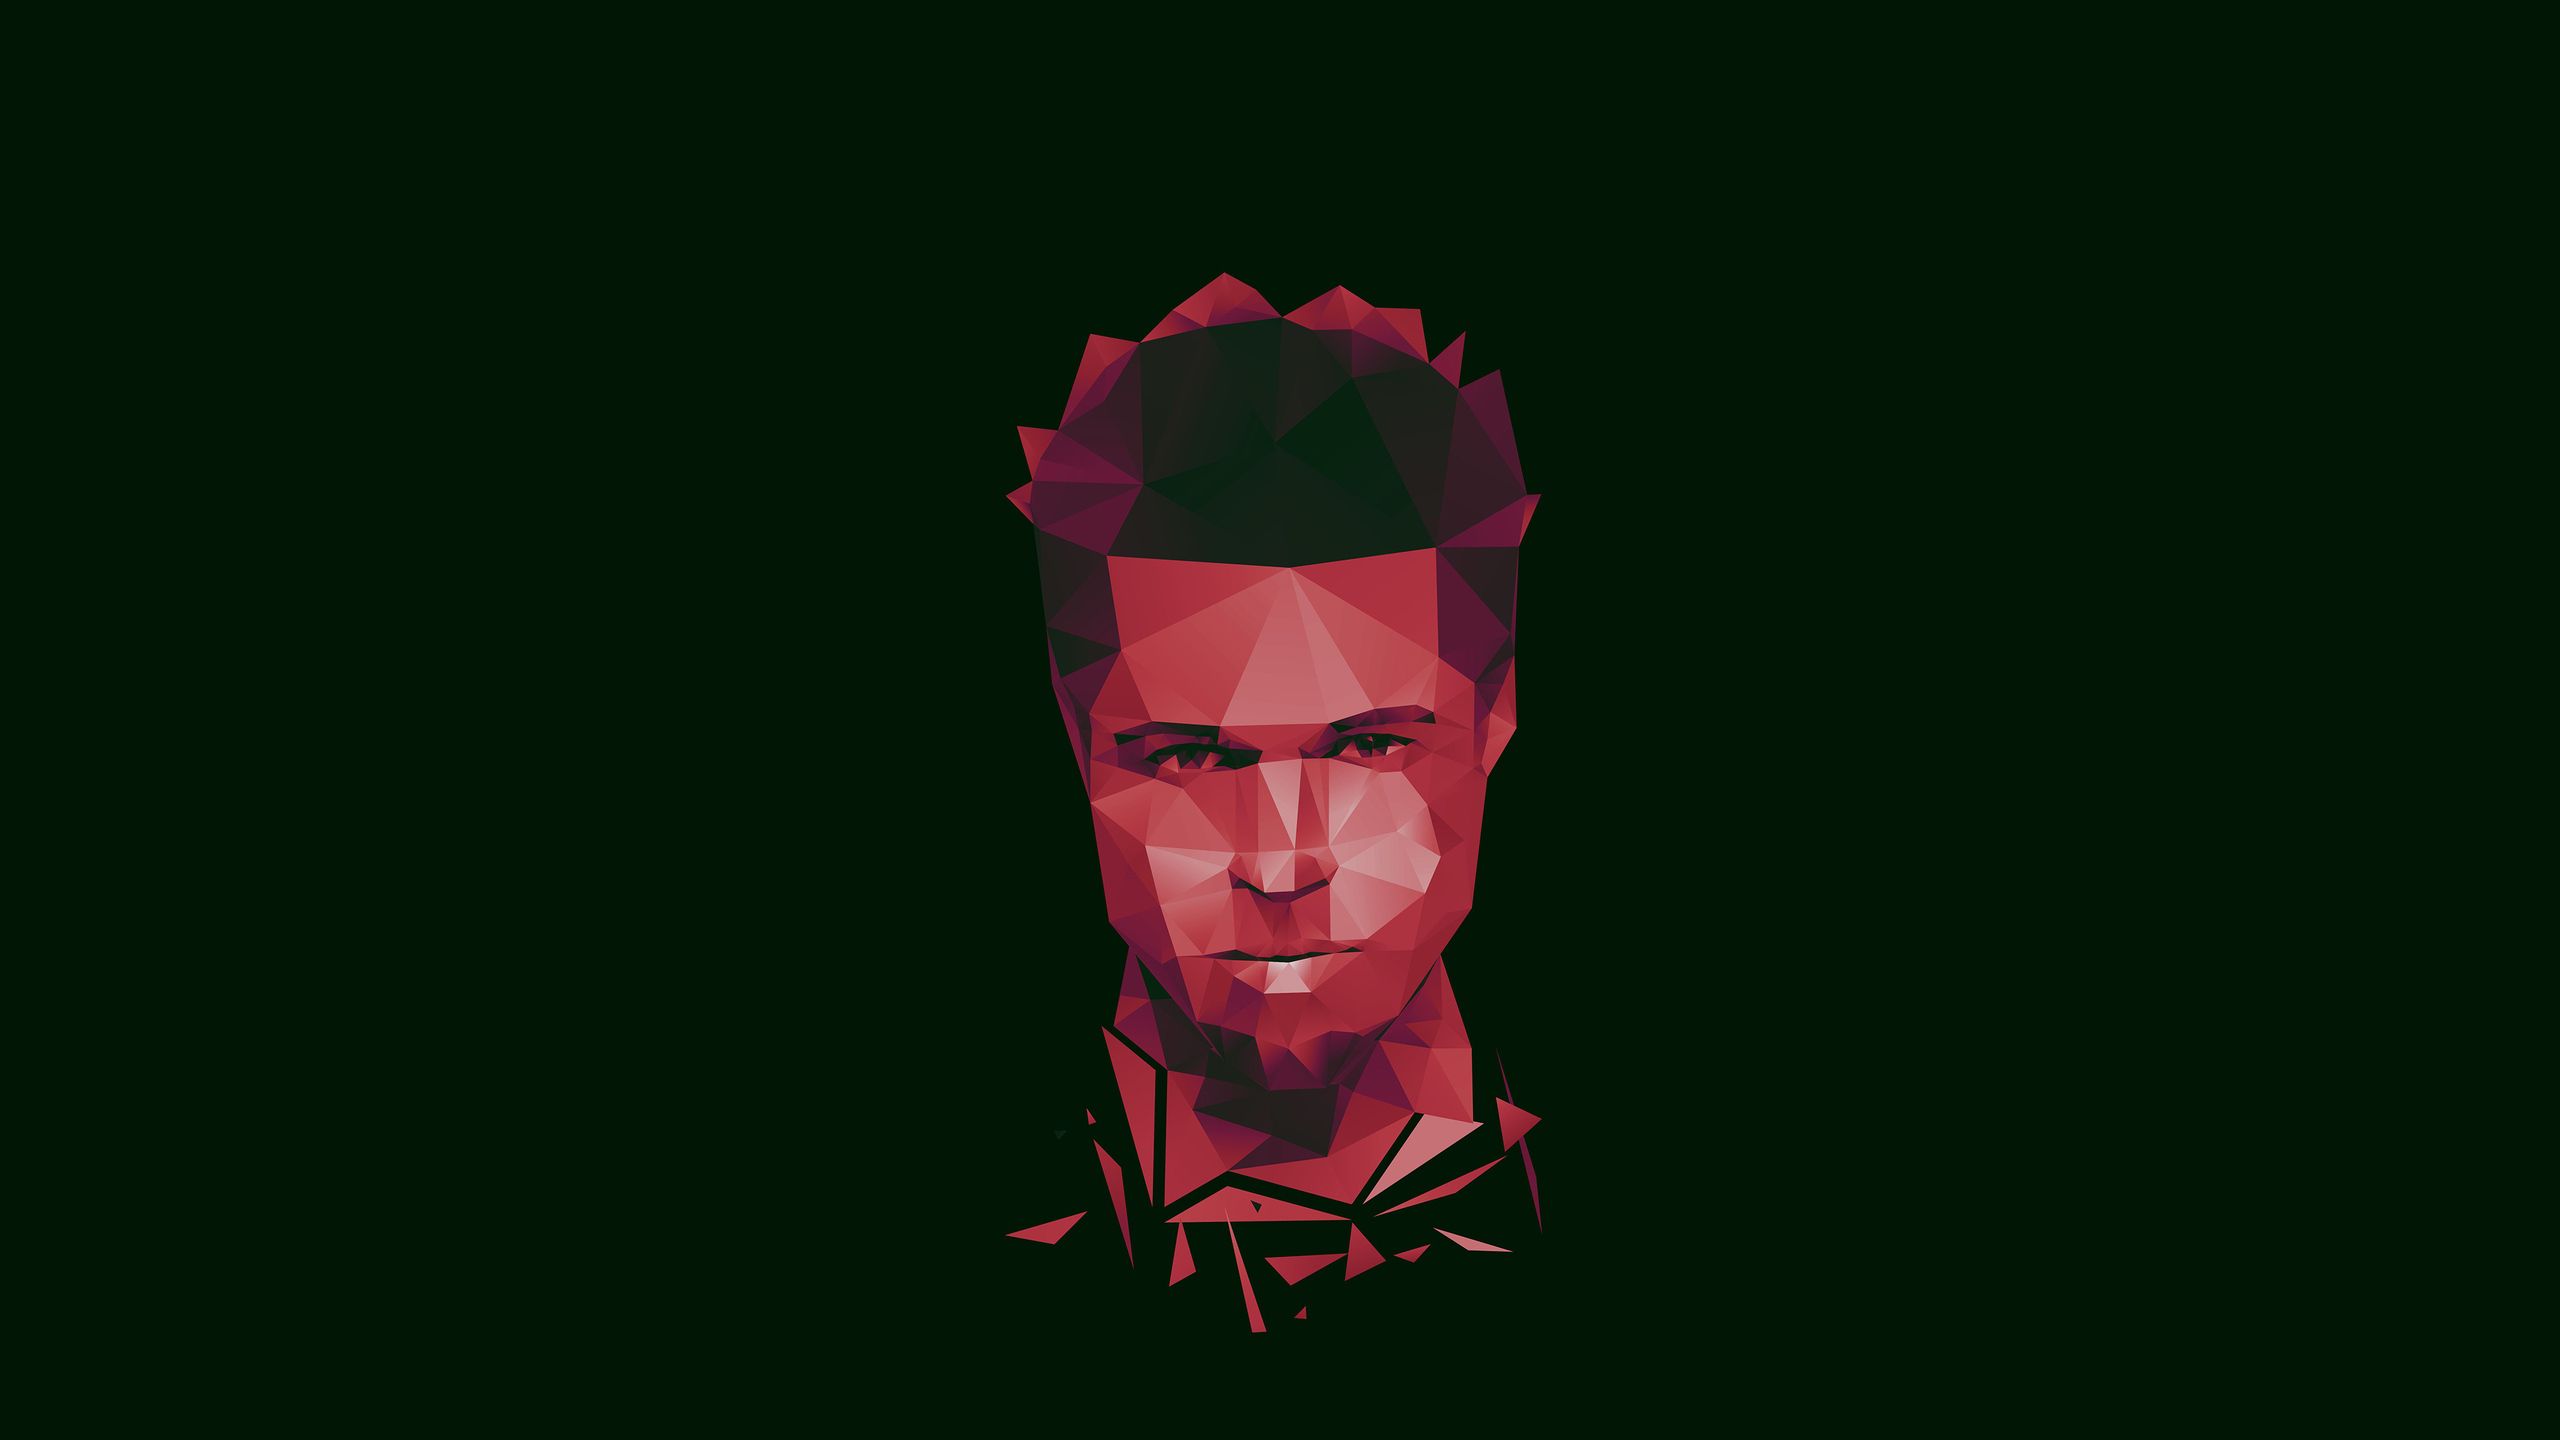 2560x1440 Tyler Durden 1440p Resolution Hd 4k Wallpaper Image Background Photo And Picture